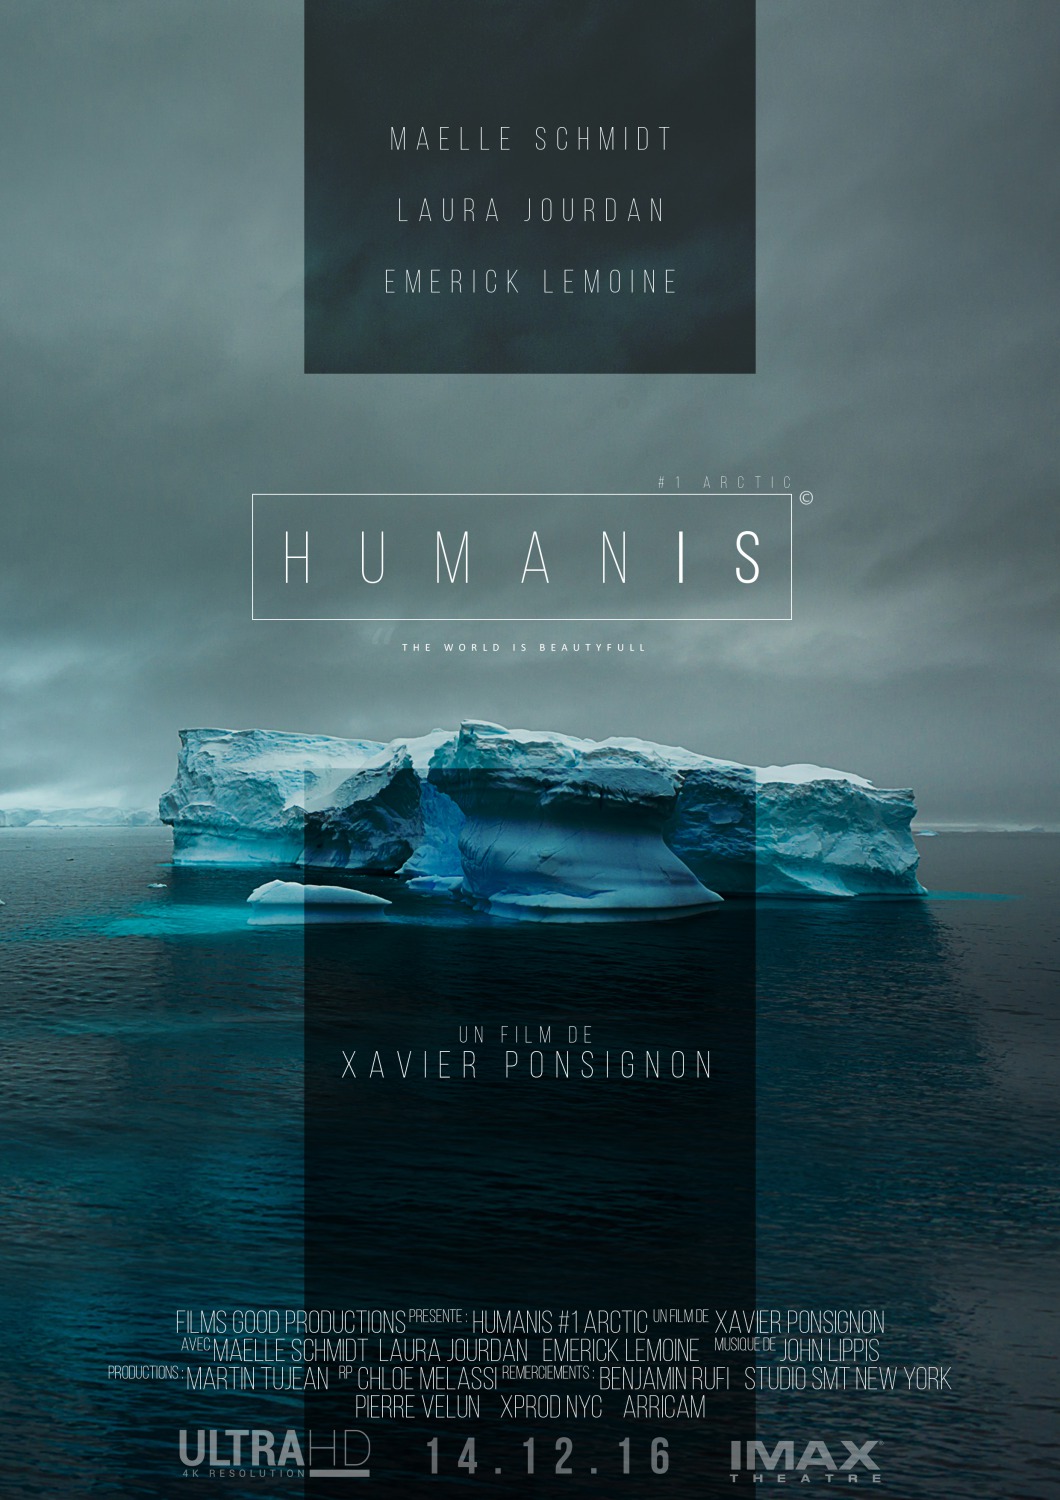 Extra Large Movie Poster Image for Humanis, Artctic Adventure 